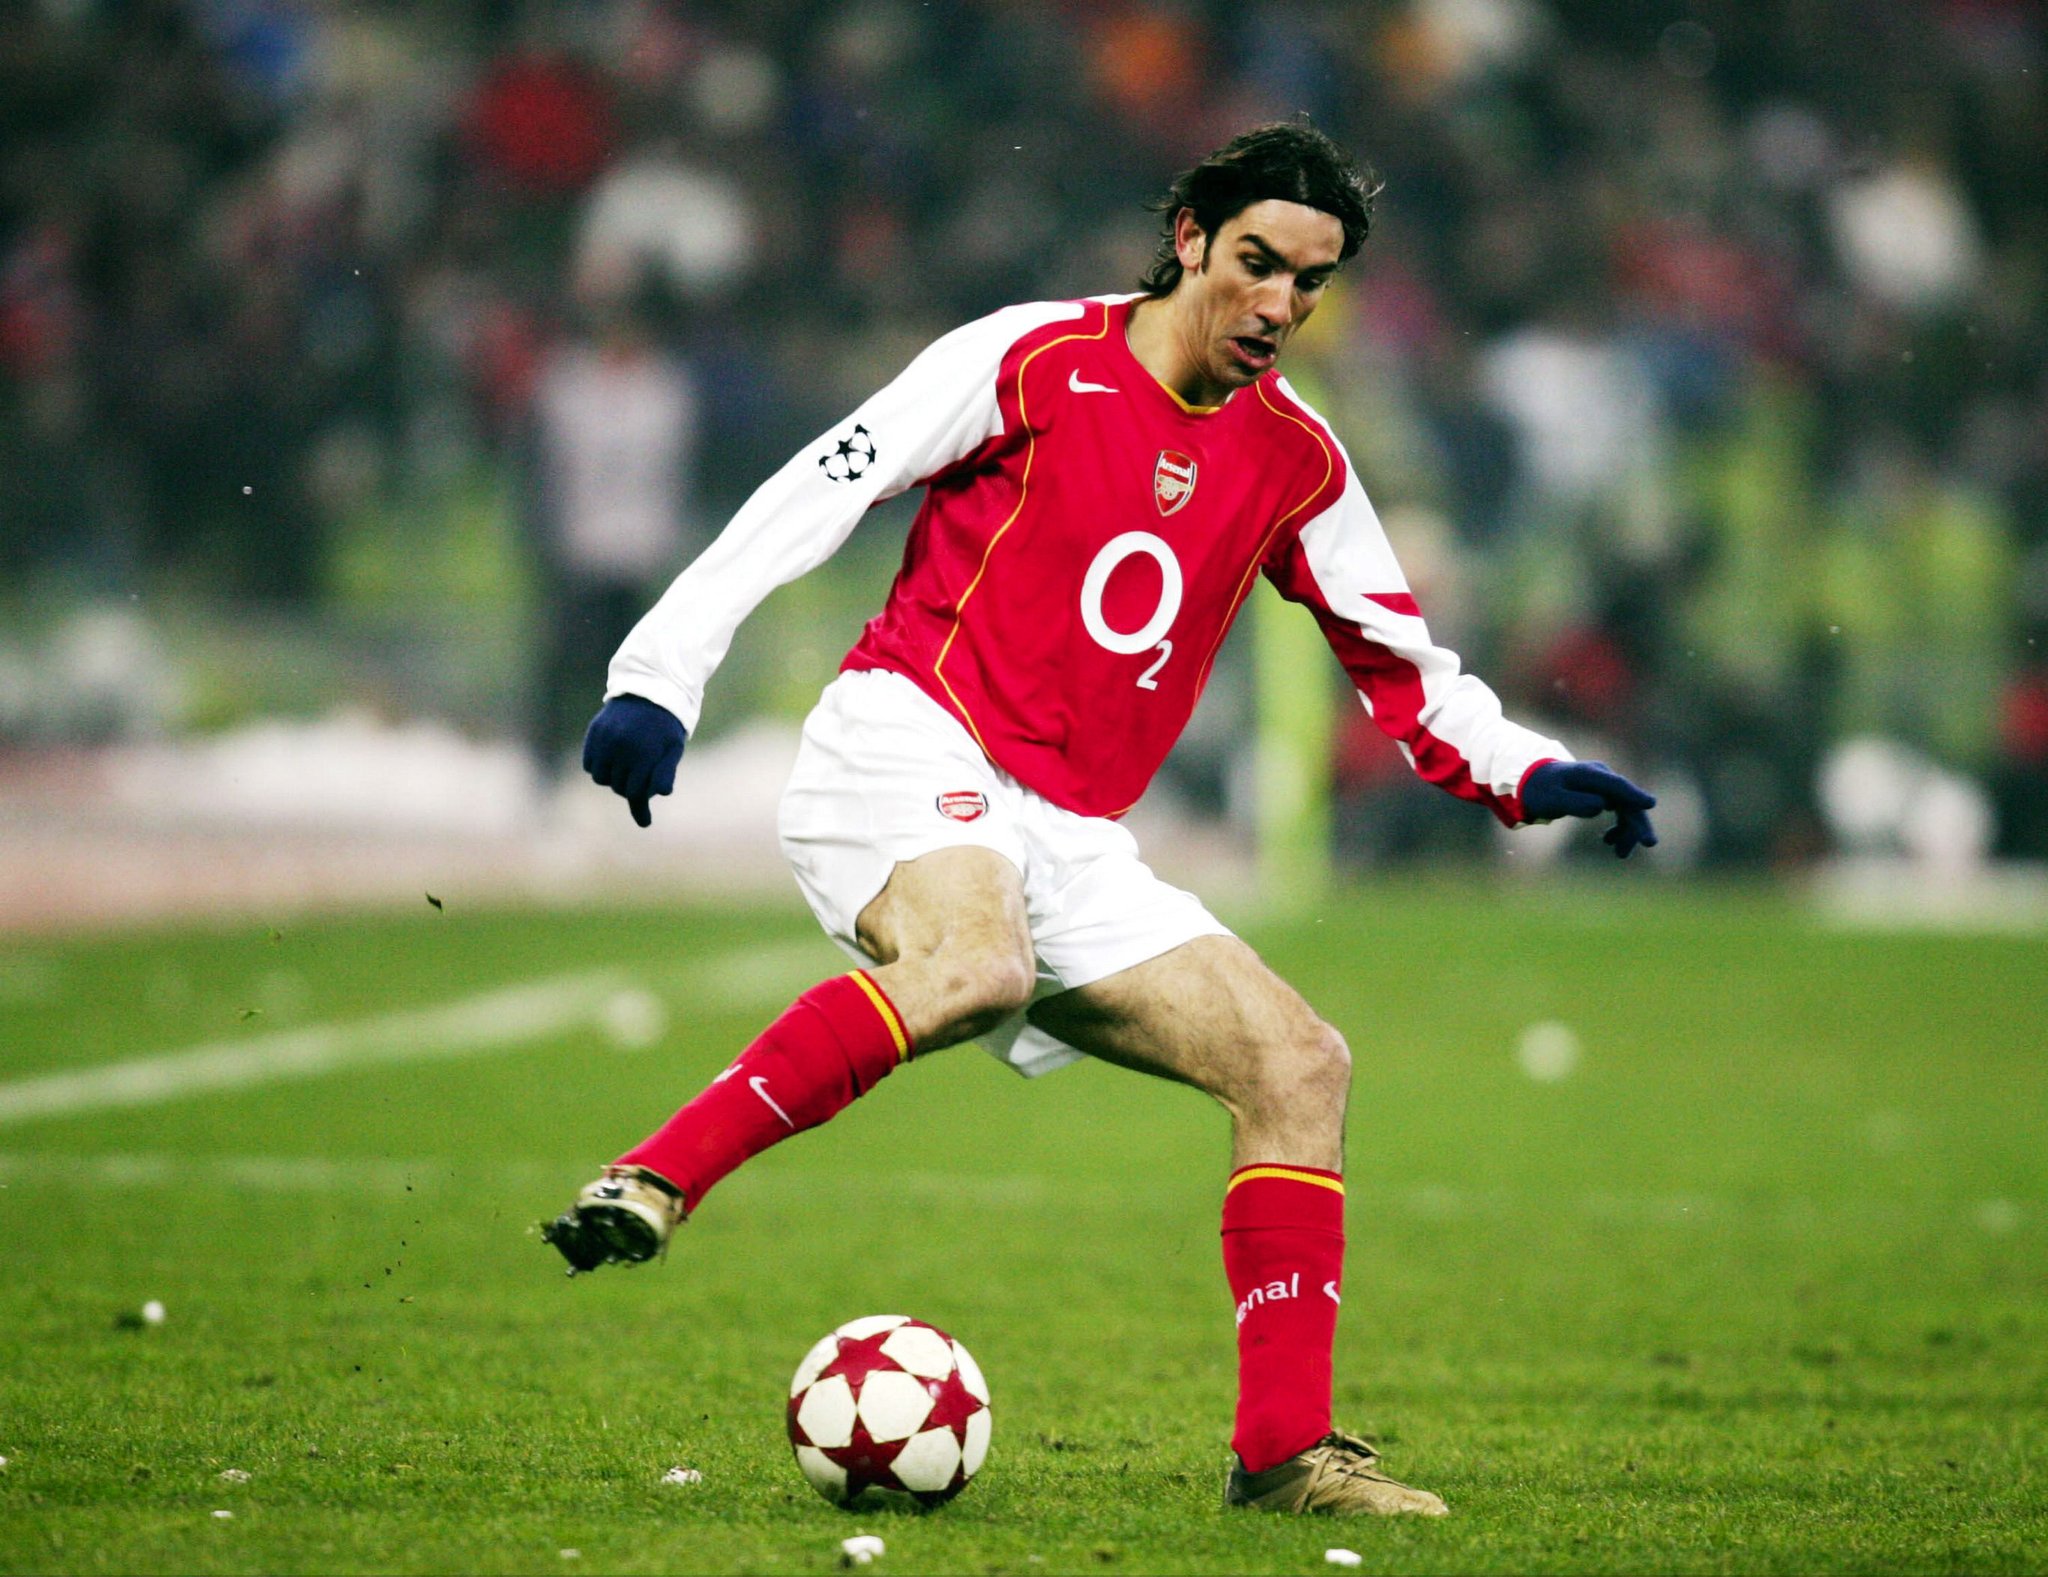 One of the greats and technically gifted player to ever play in the prem.

Happy Birthday Robert Pires 